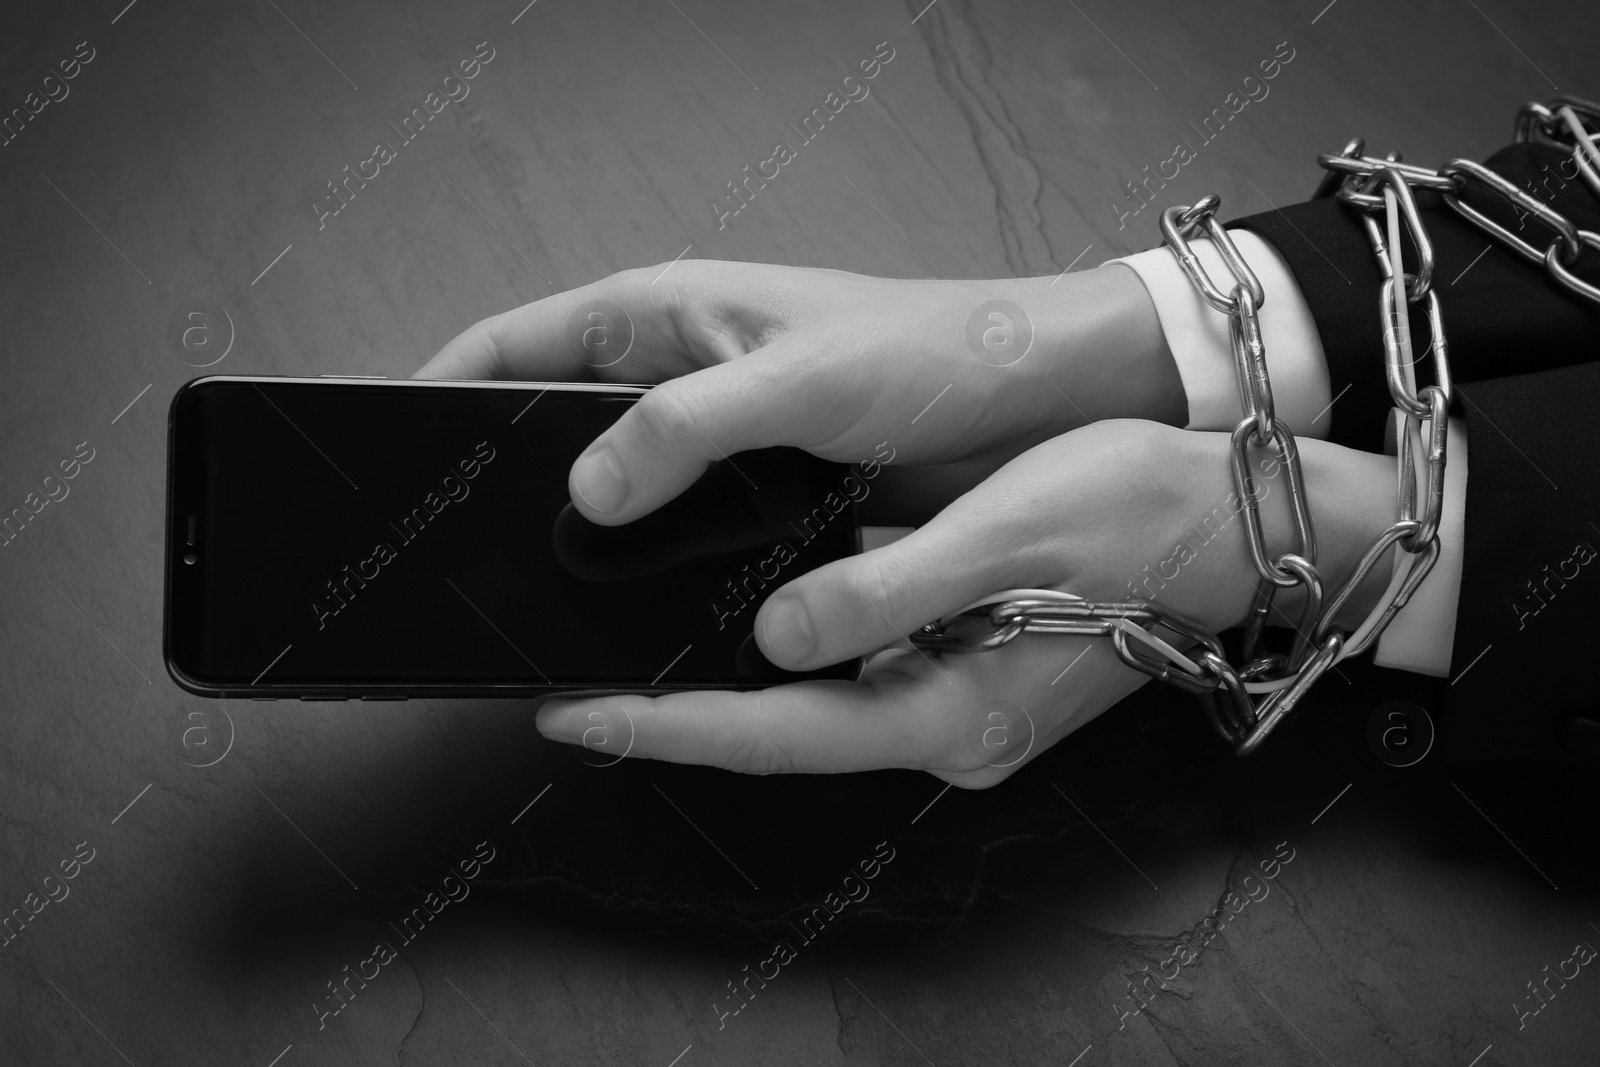 Image of Closeup view of internet addicted woman with chained hands using smartphone at dark table, space for text. Black and white effect